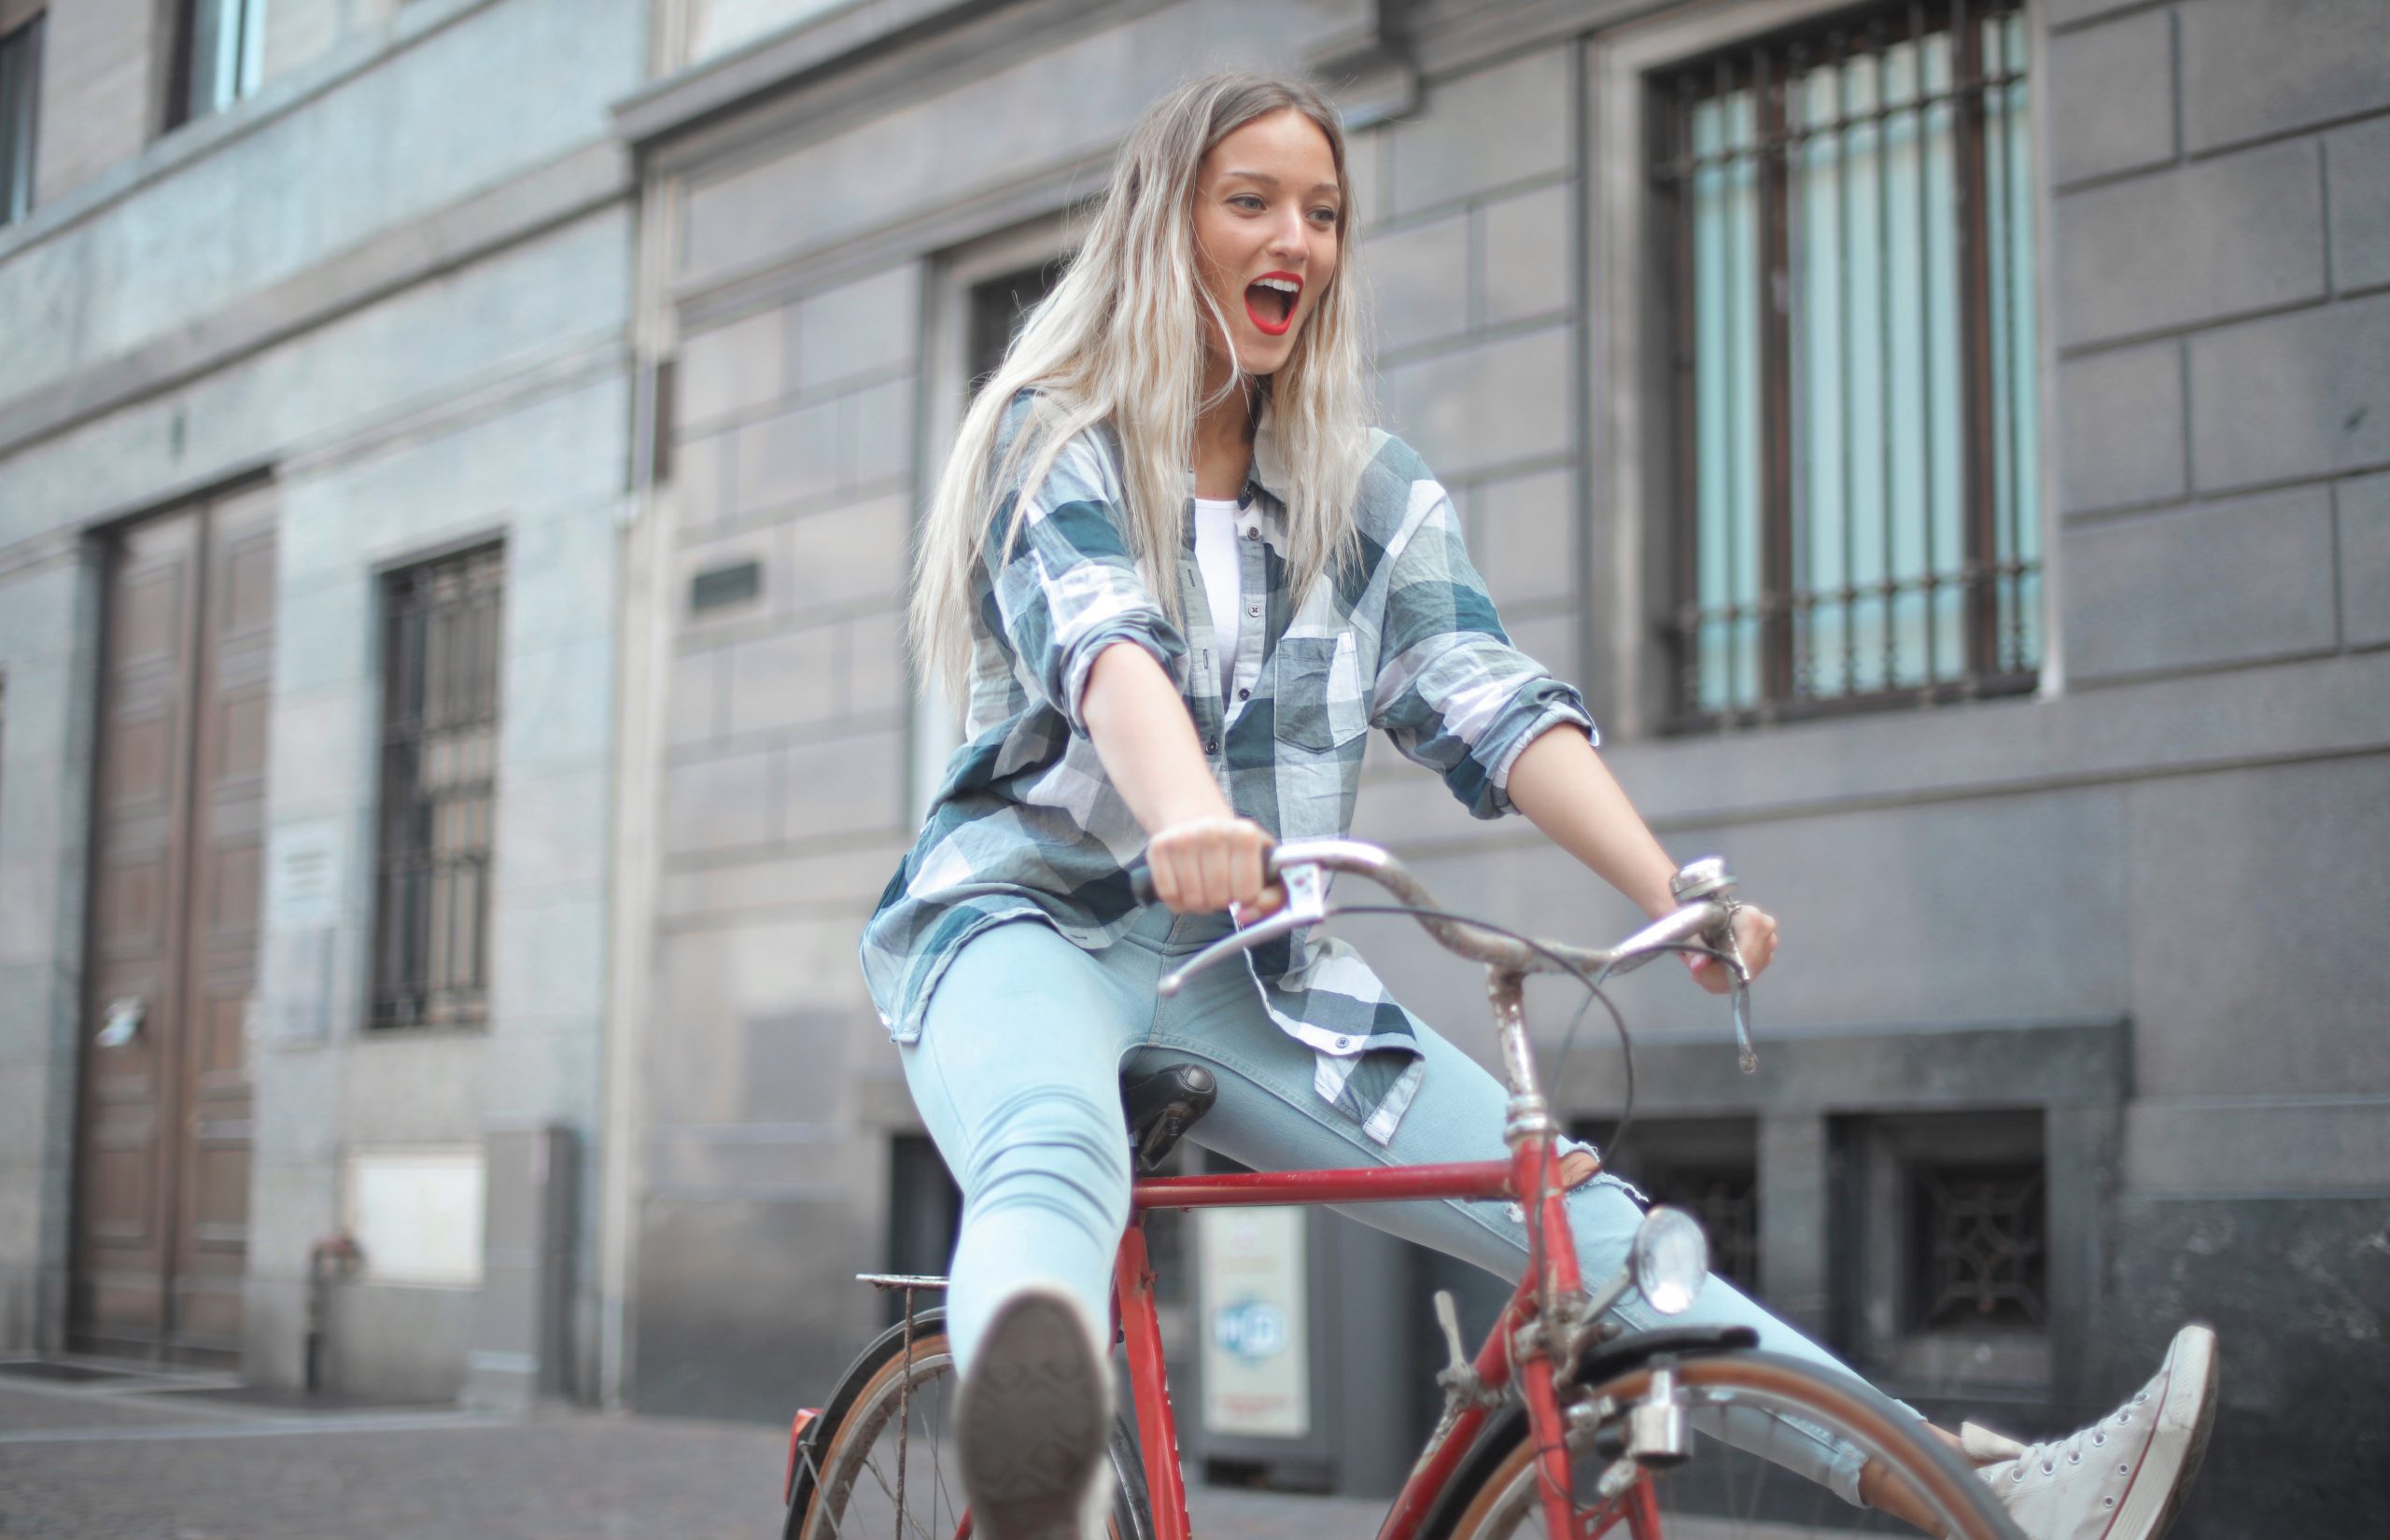 Find out why you should switch from car to bike